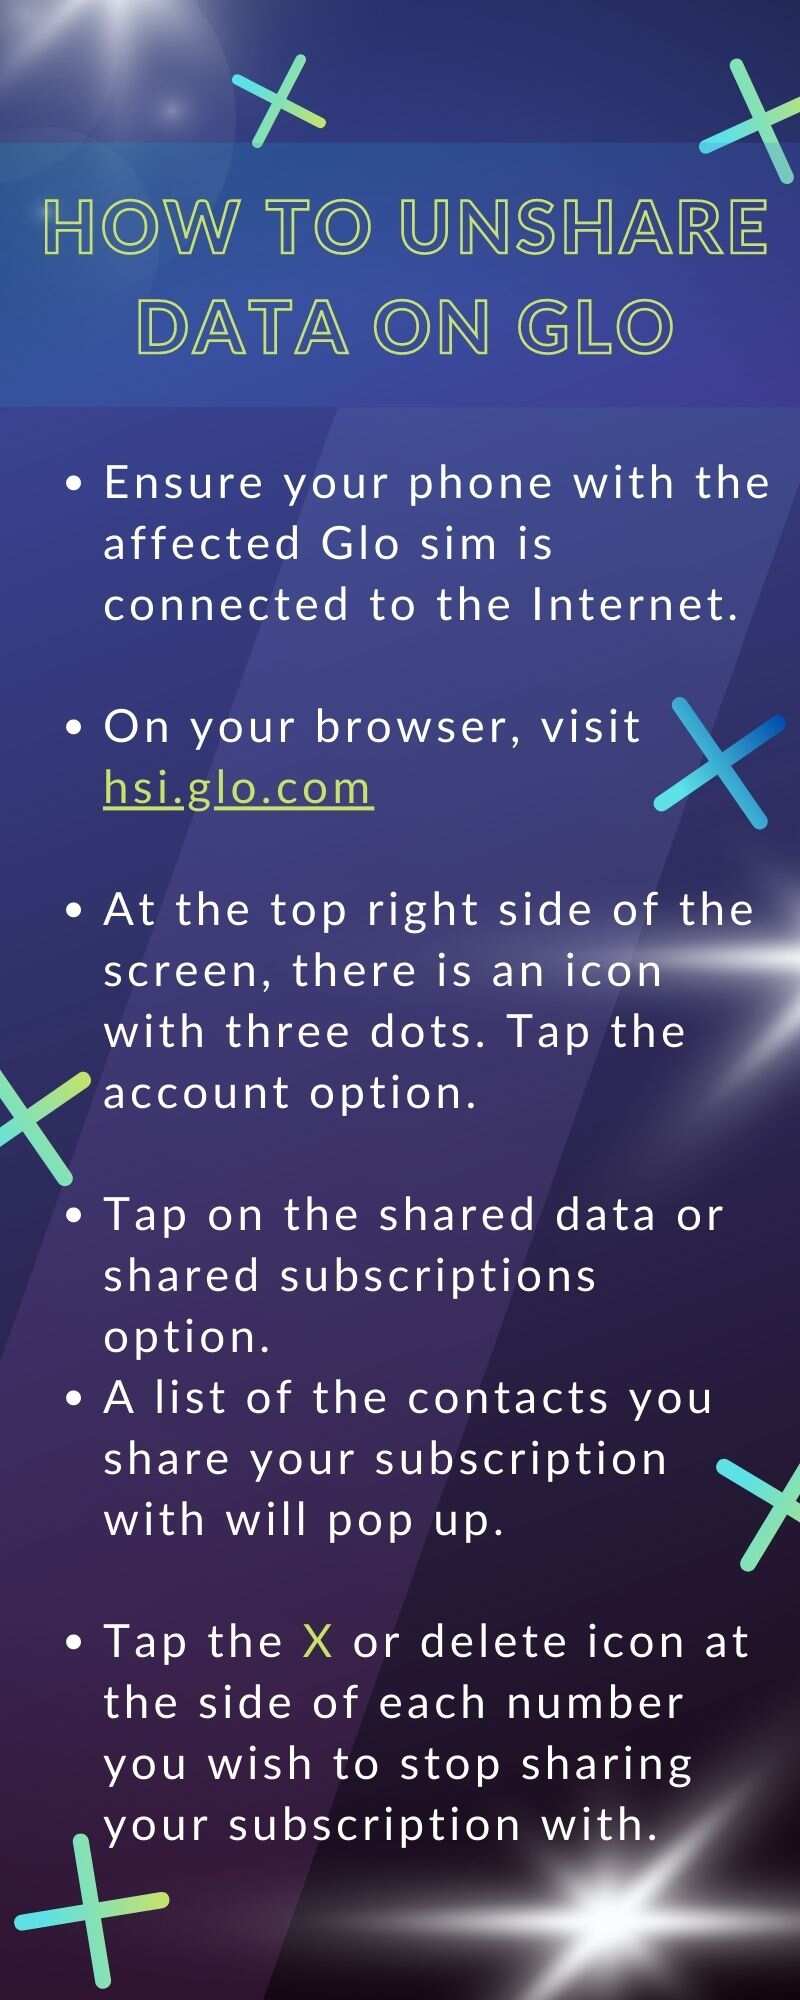 How to unshare data on GLO